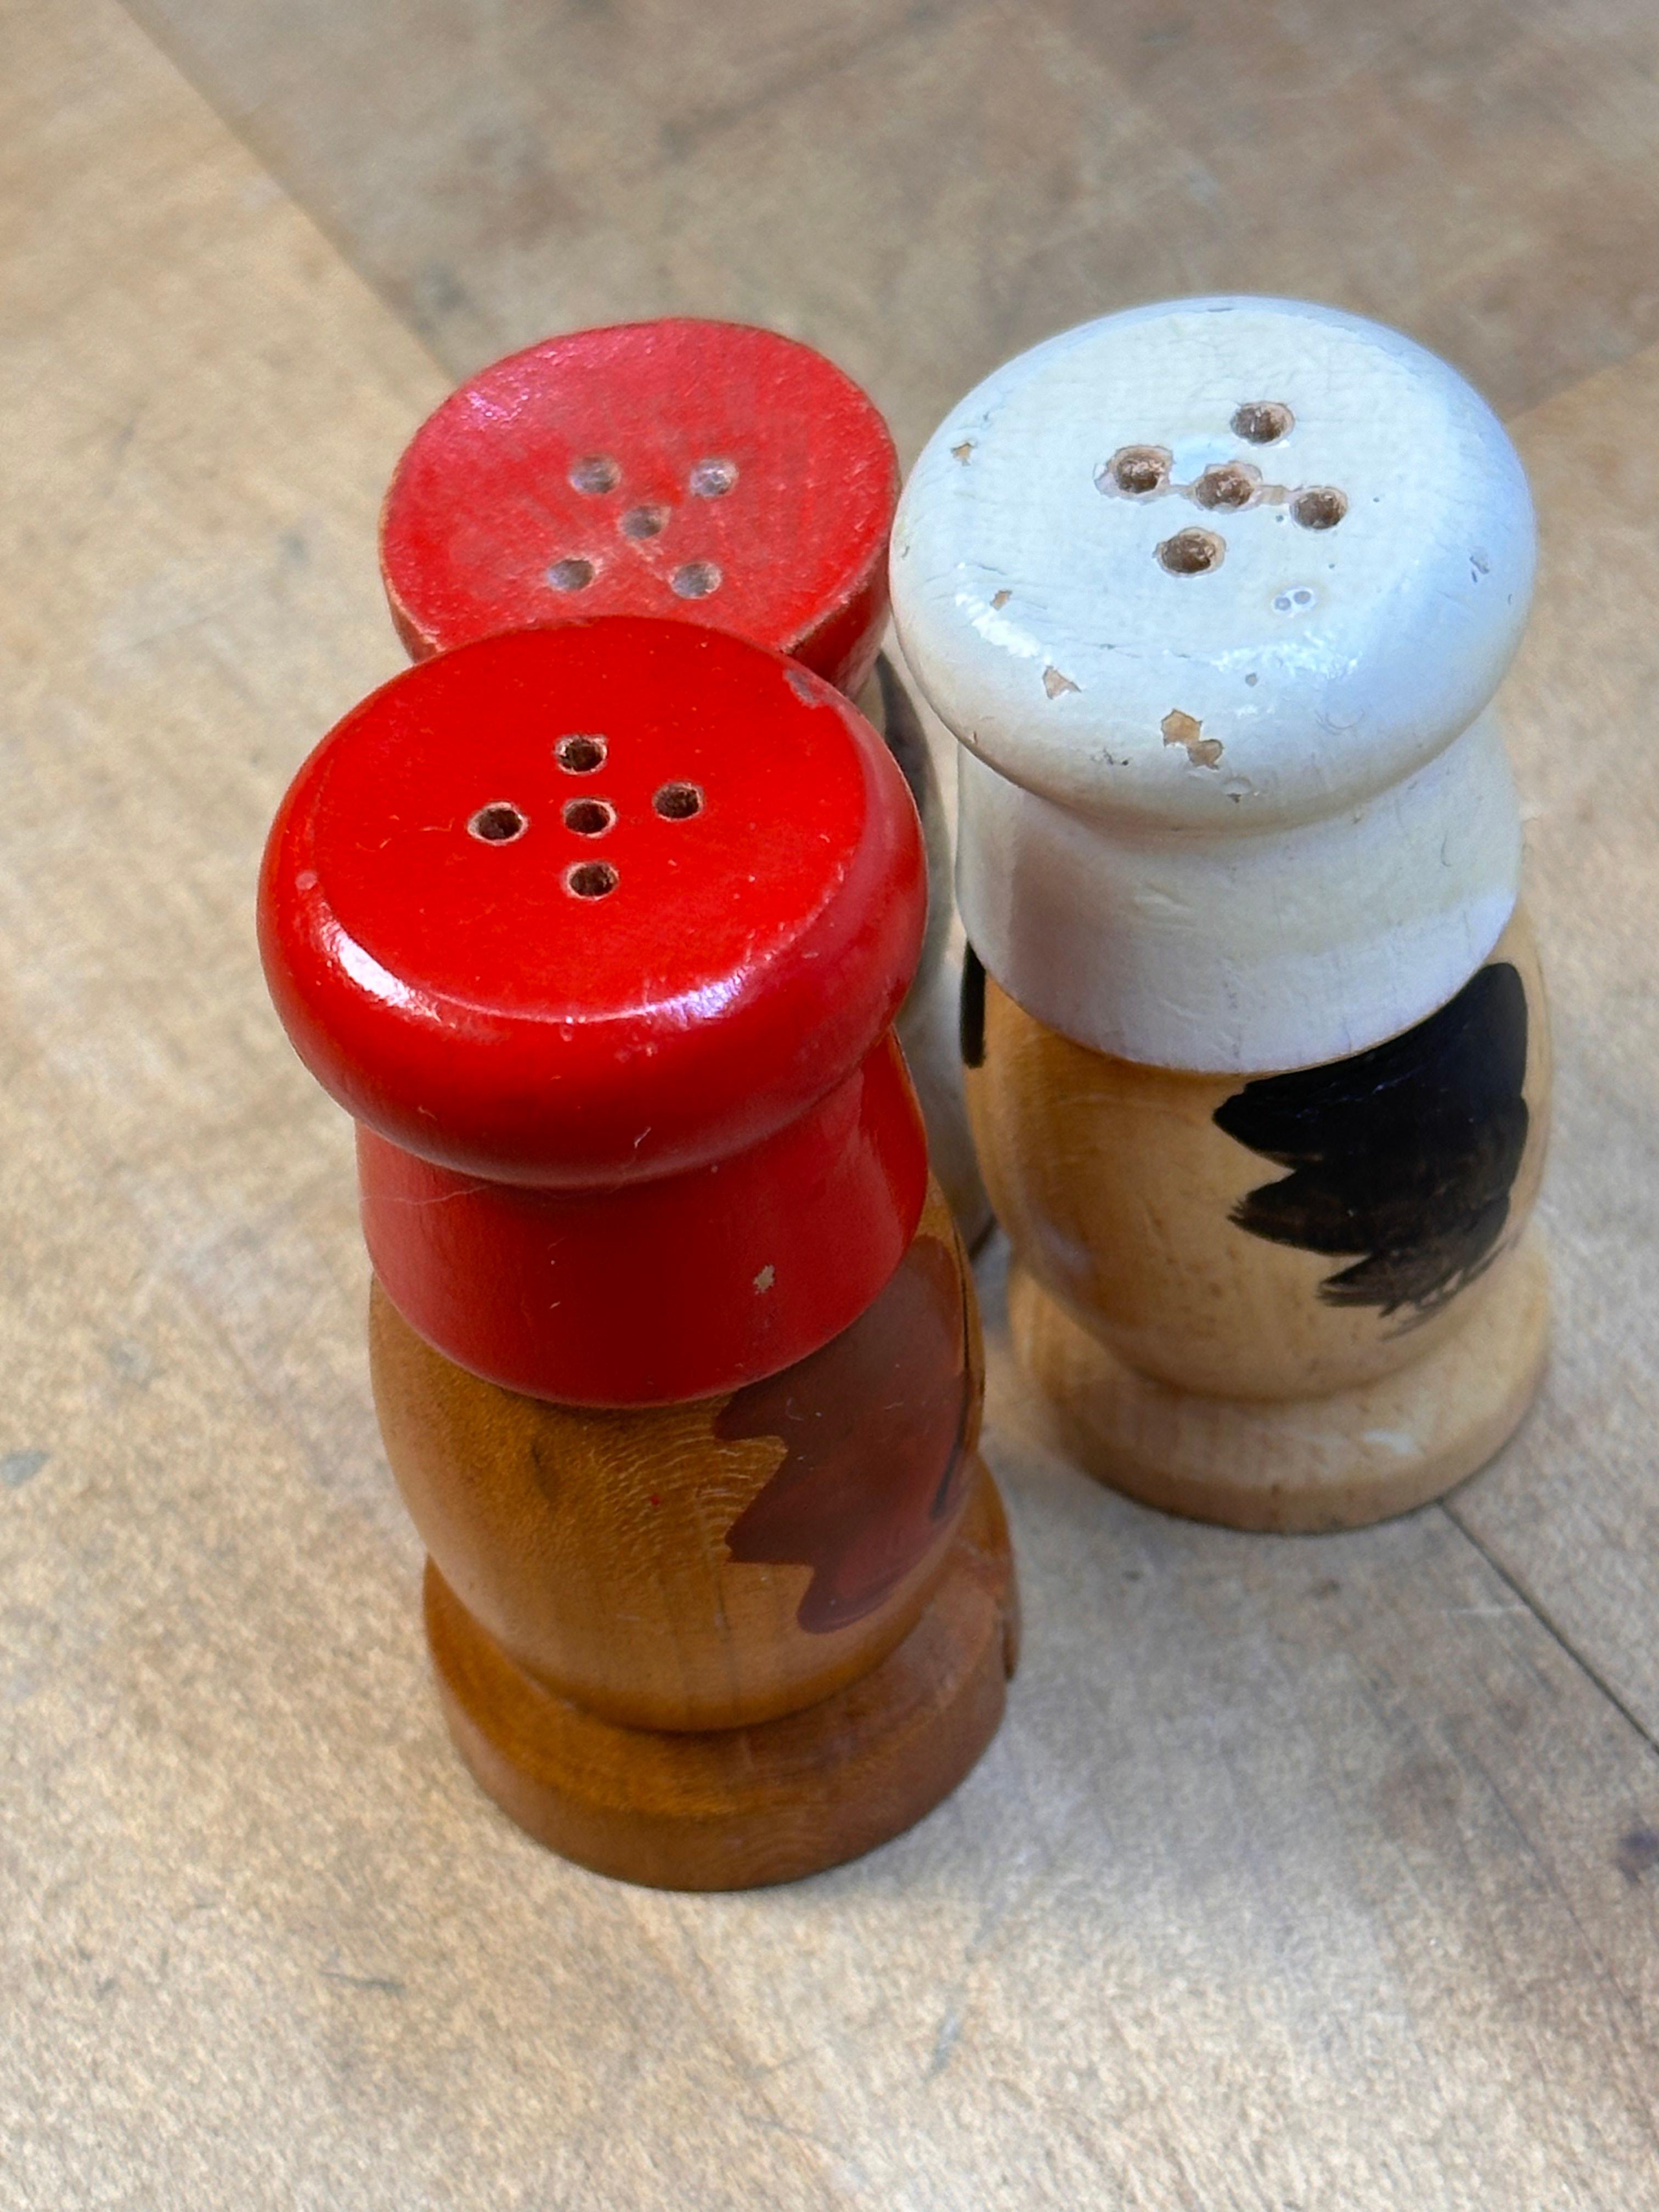 Collection of Salt and Pepper Shakers